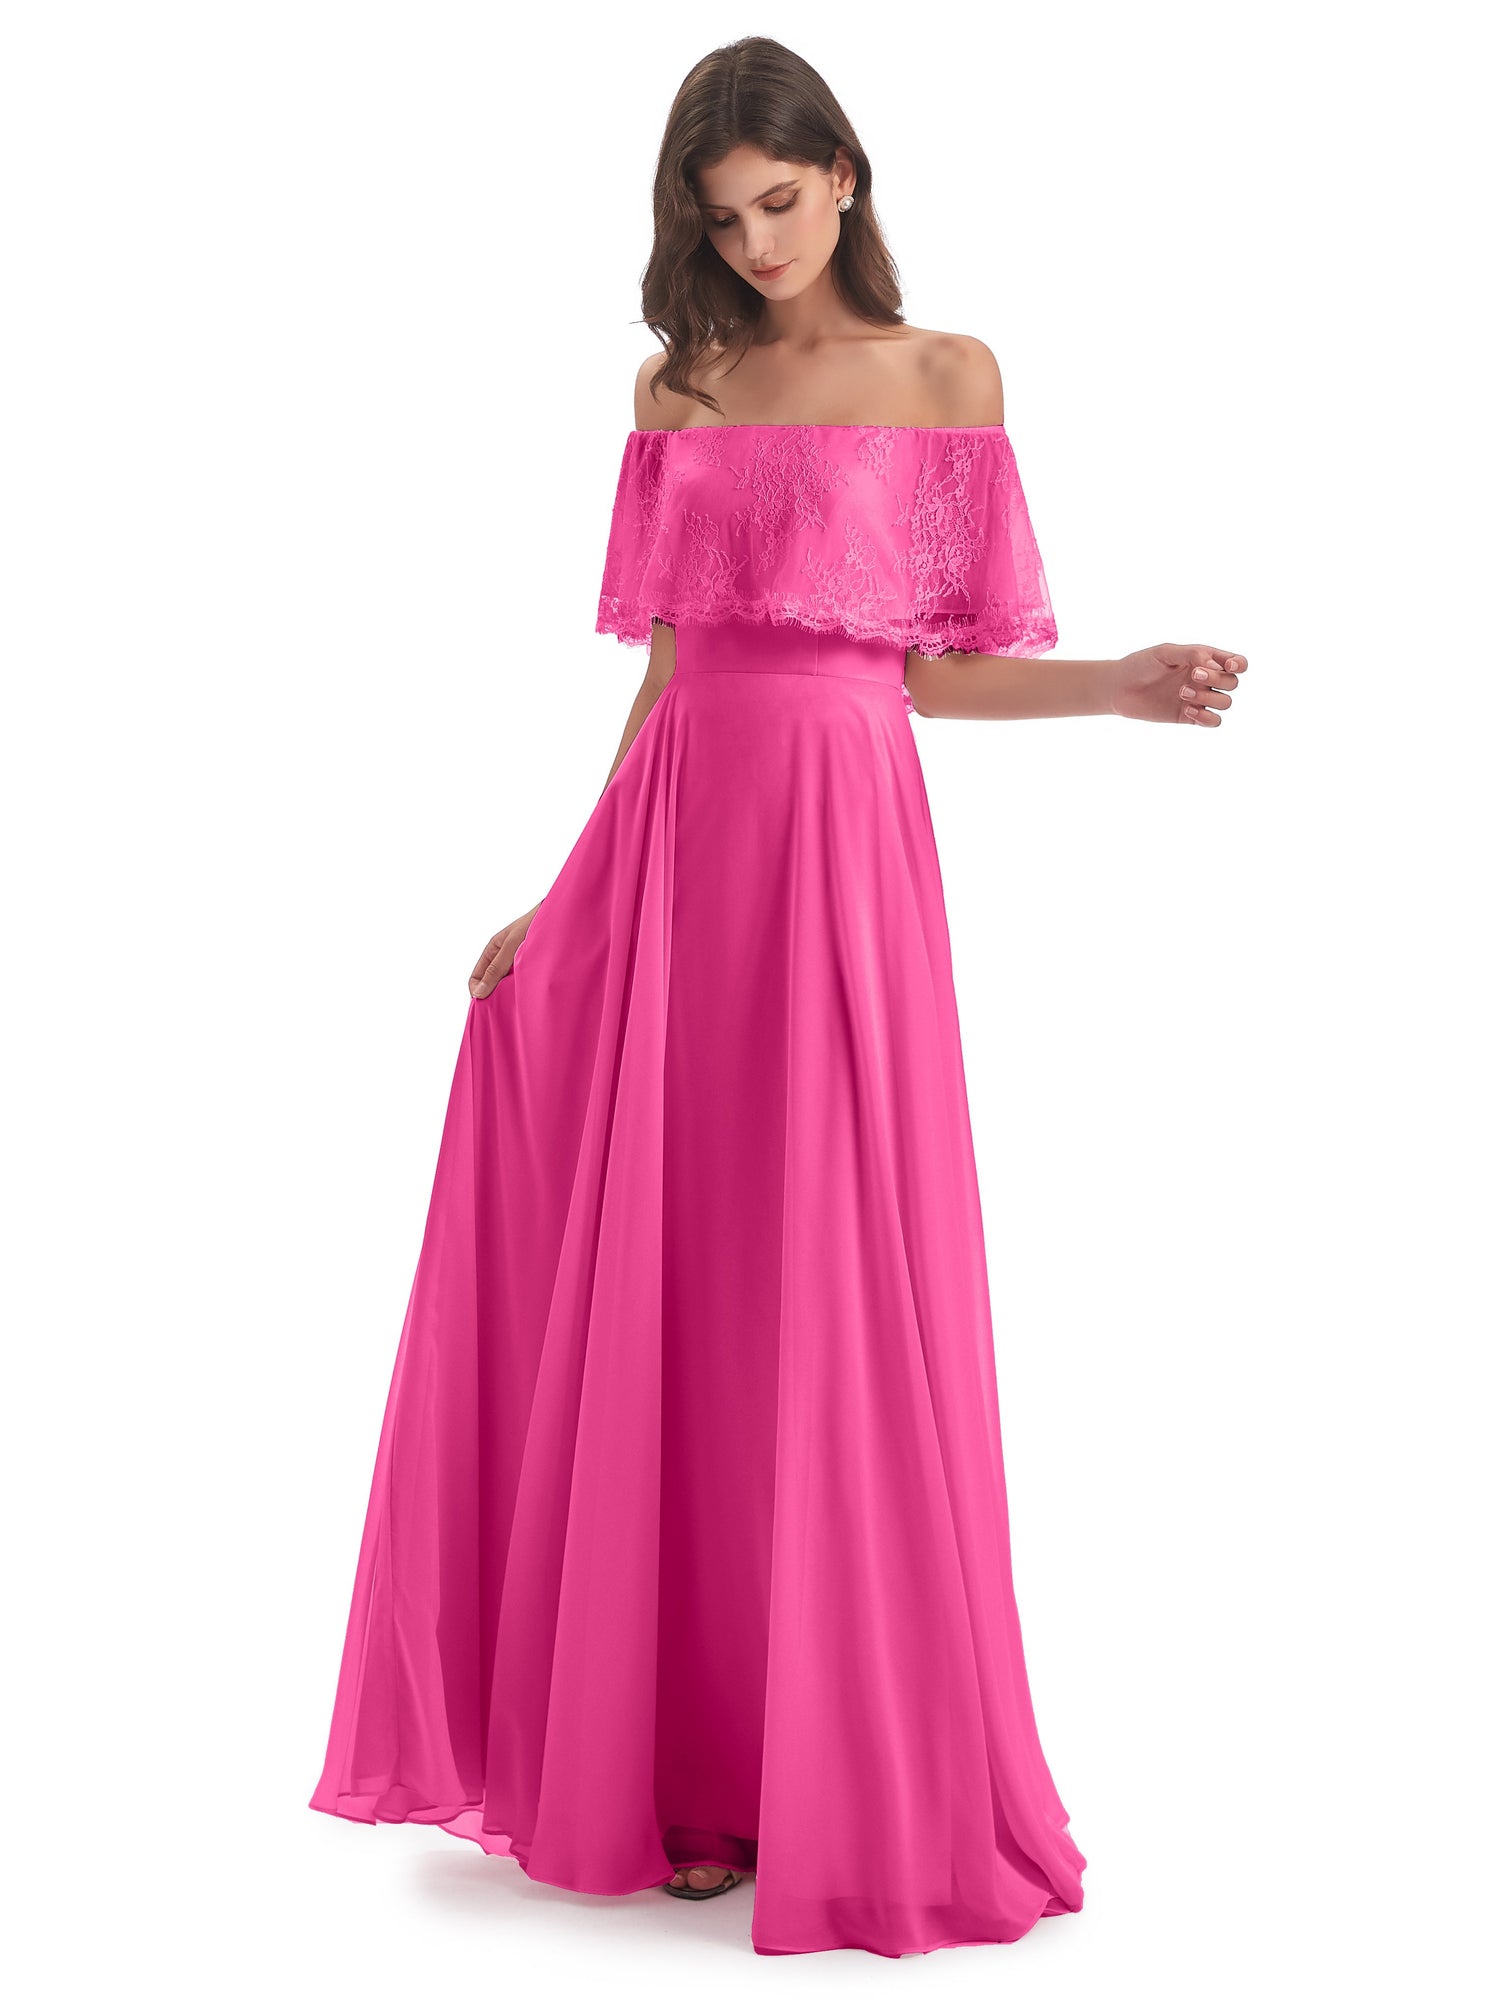 Layla Tulle Maxi Dress | Green + Pink Floral